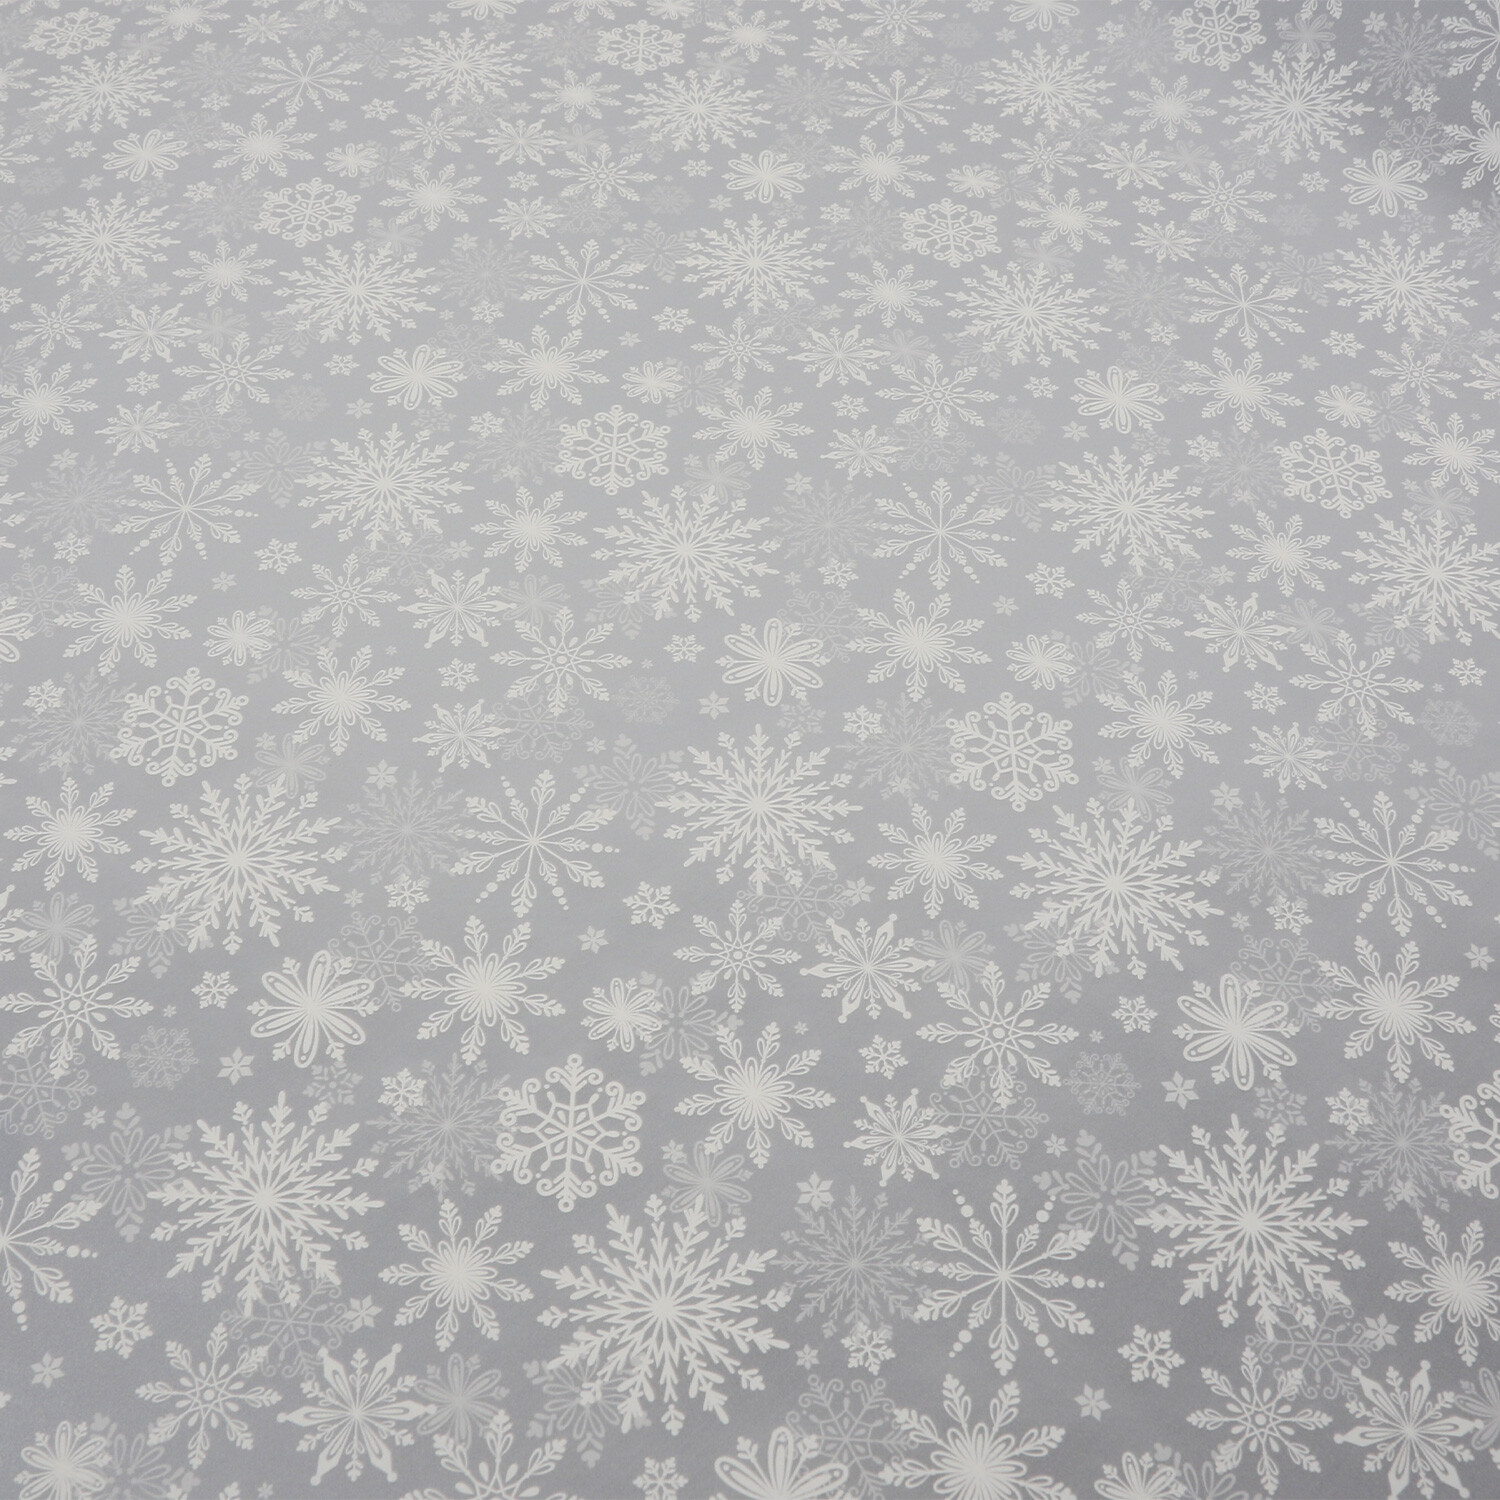 Silver Snowflake Wrapping Paper 4m - Silver Image 3